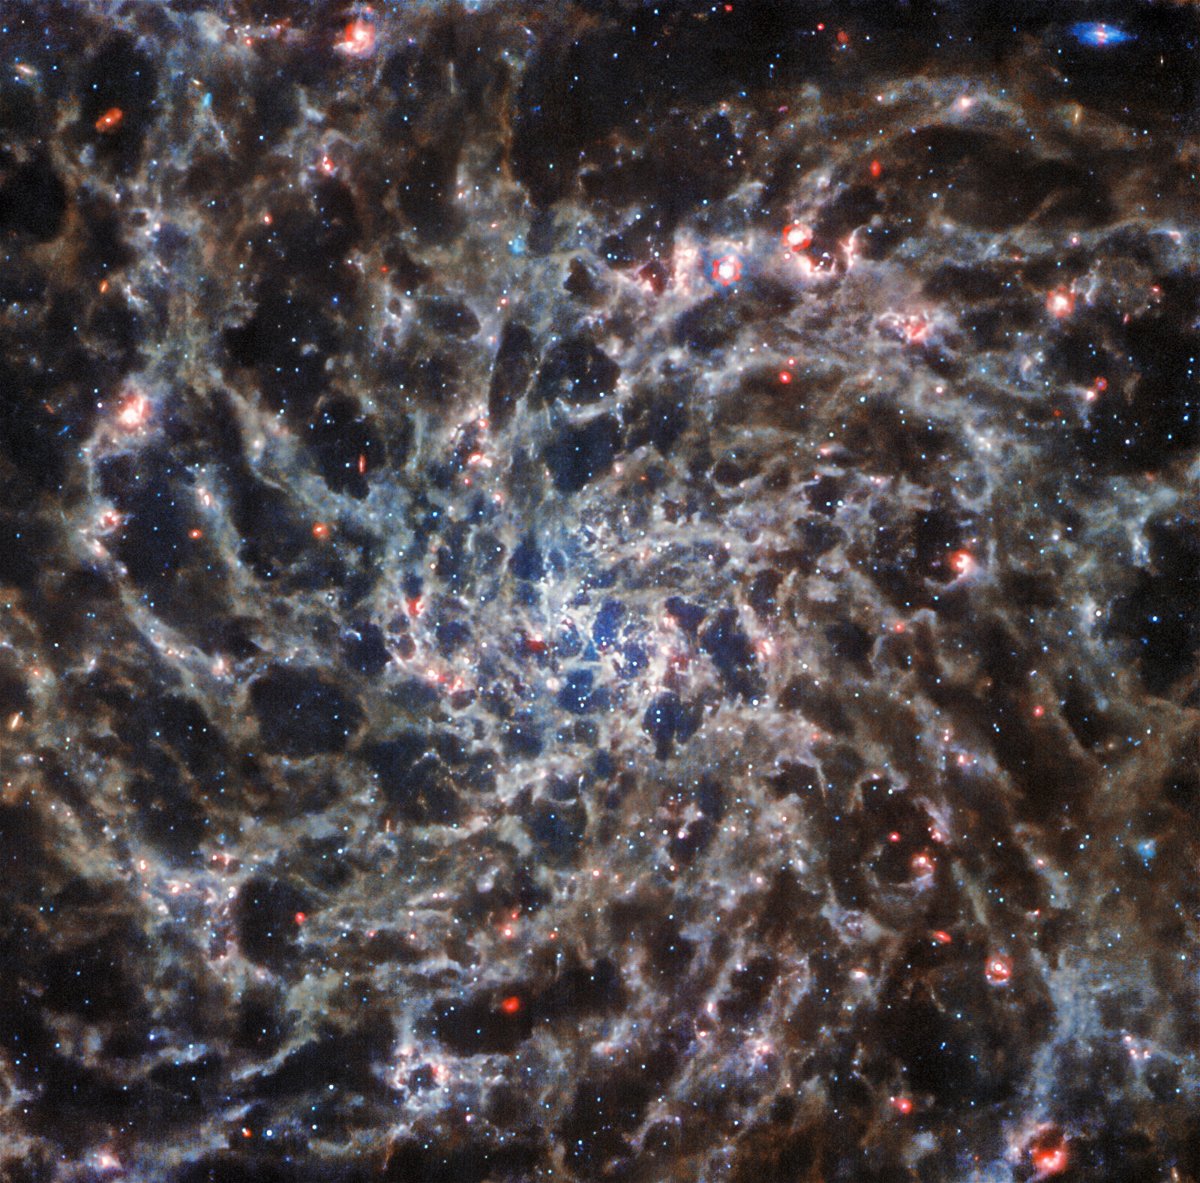 <i>ESA/NASA/CSA/J. Lee</i><br/>A dazzling spiral galaxy located 29 million light-years from Earth appears in 